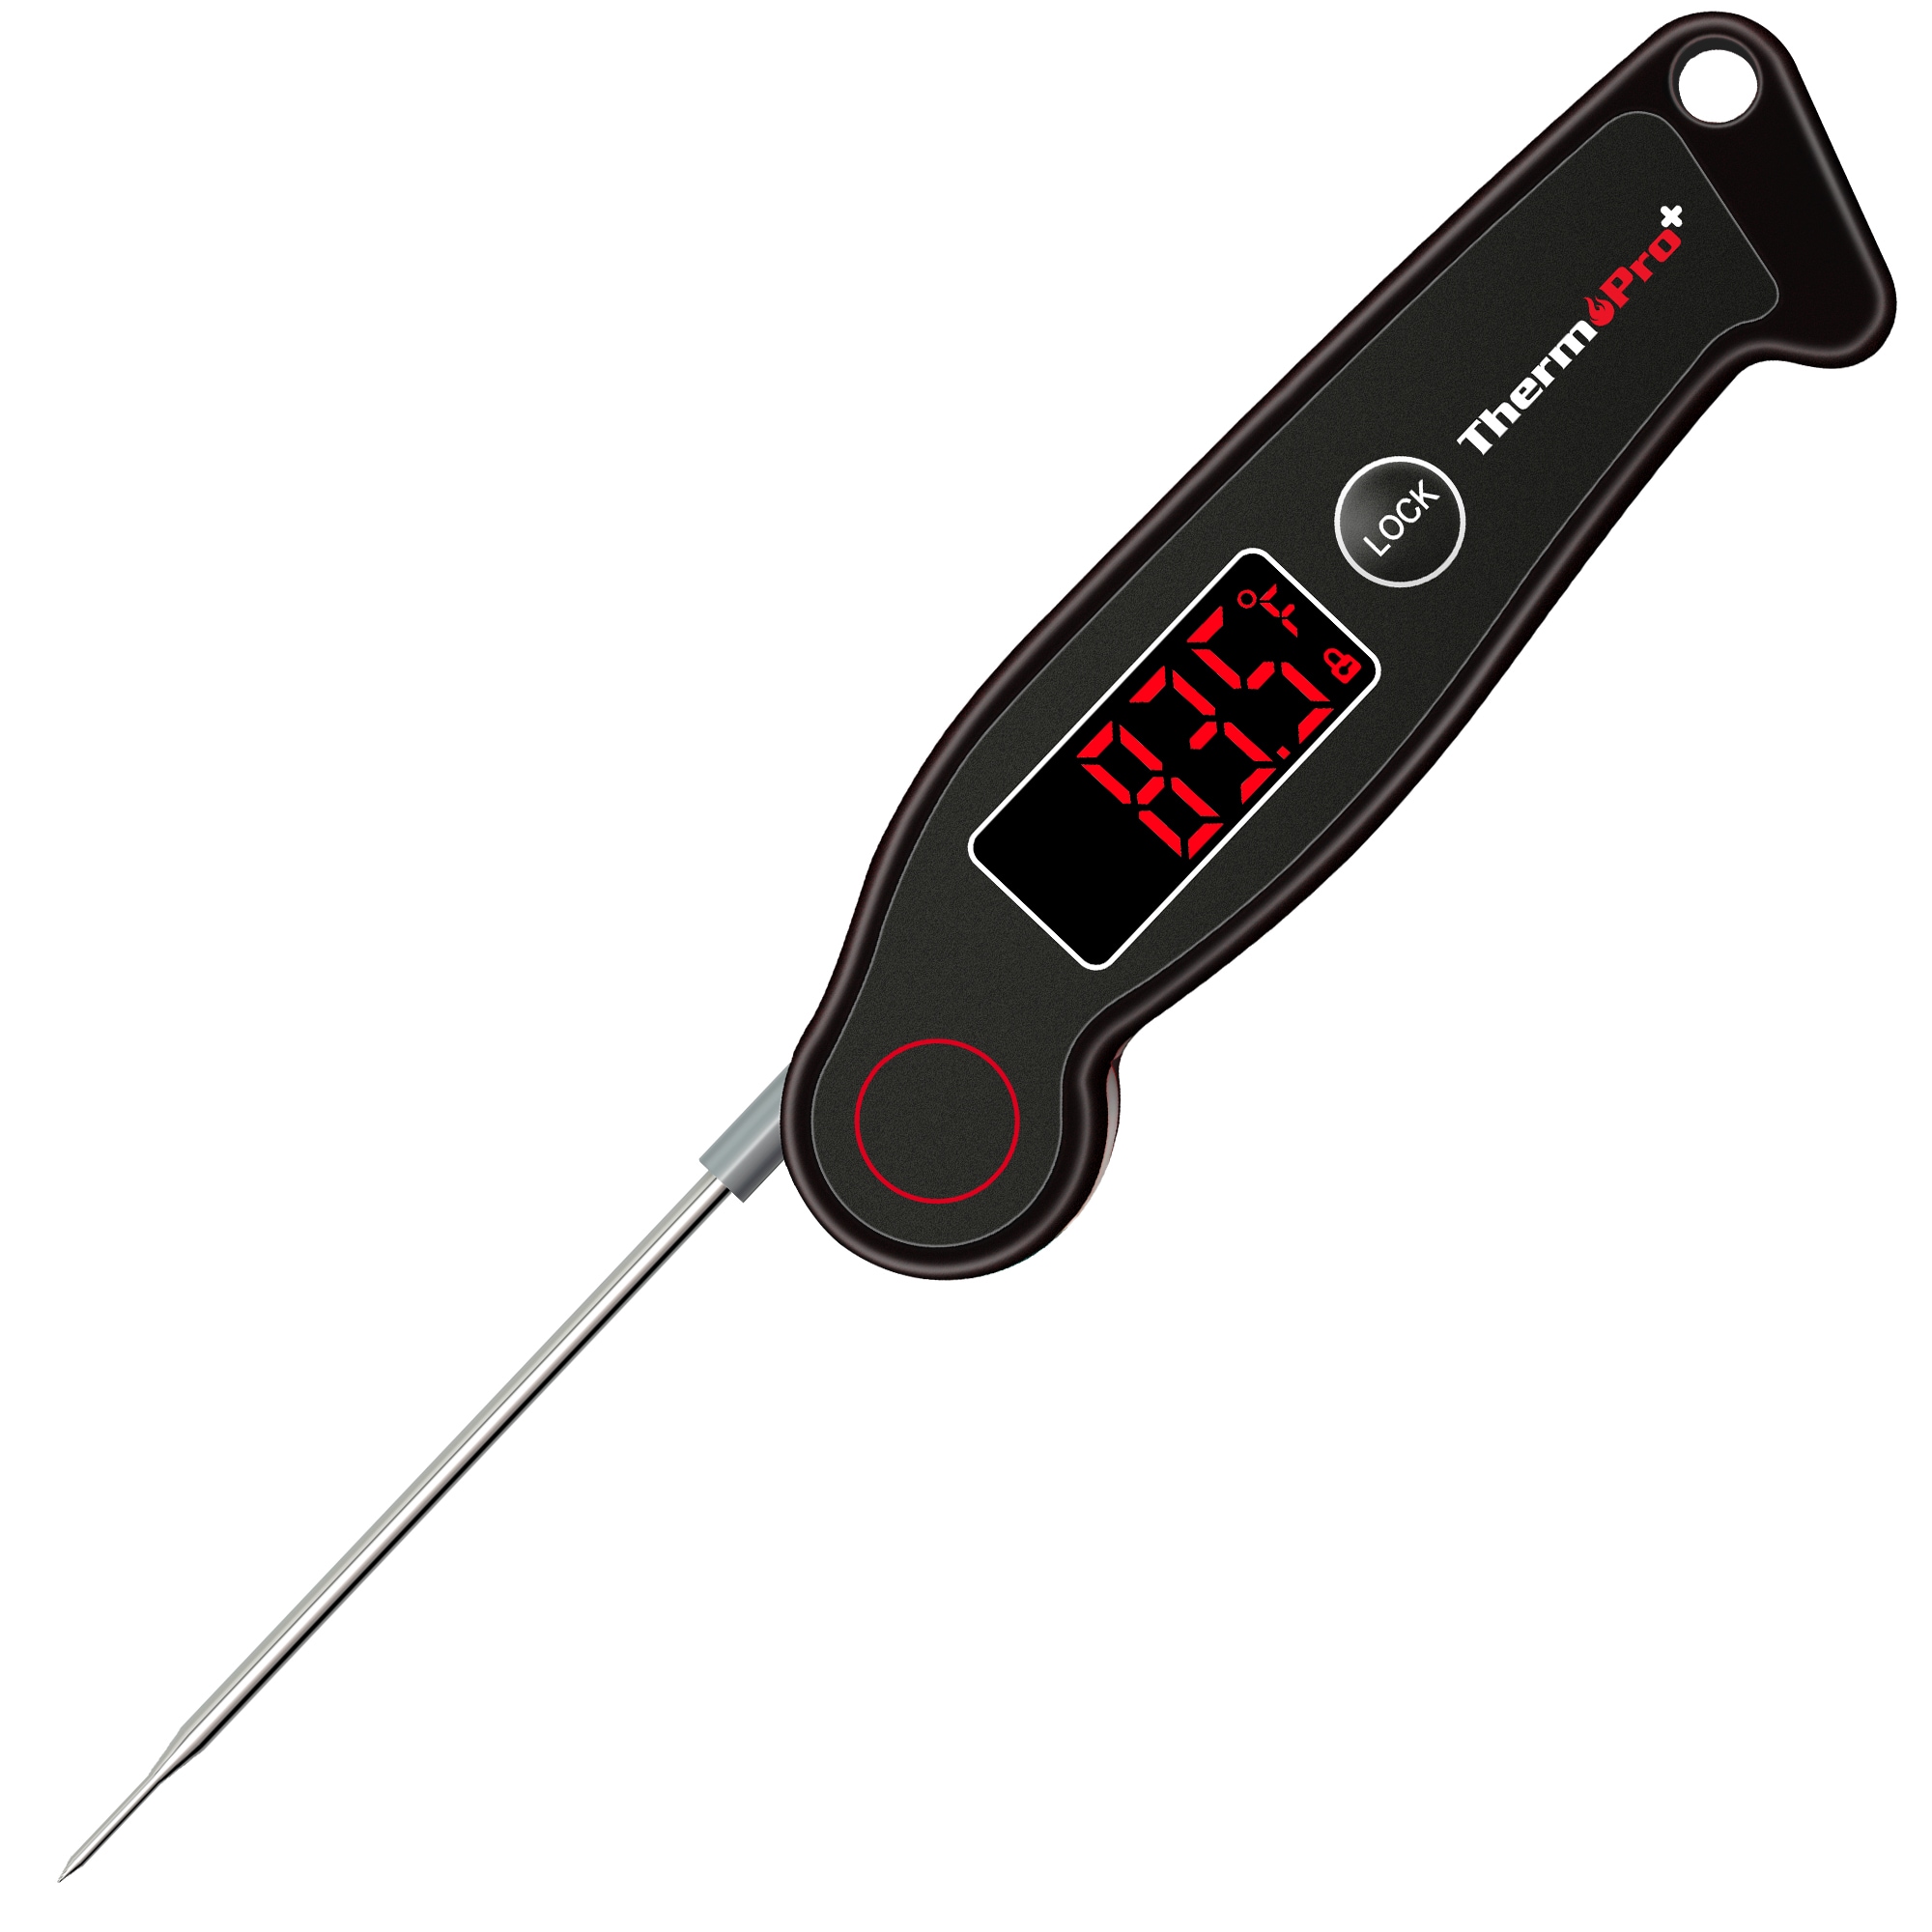 ThermoPro TP-06S Digital Meat Thermometer